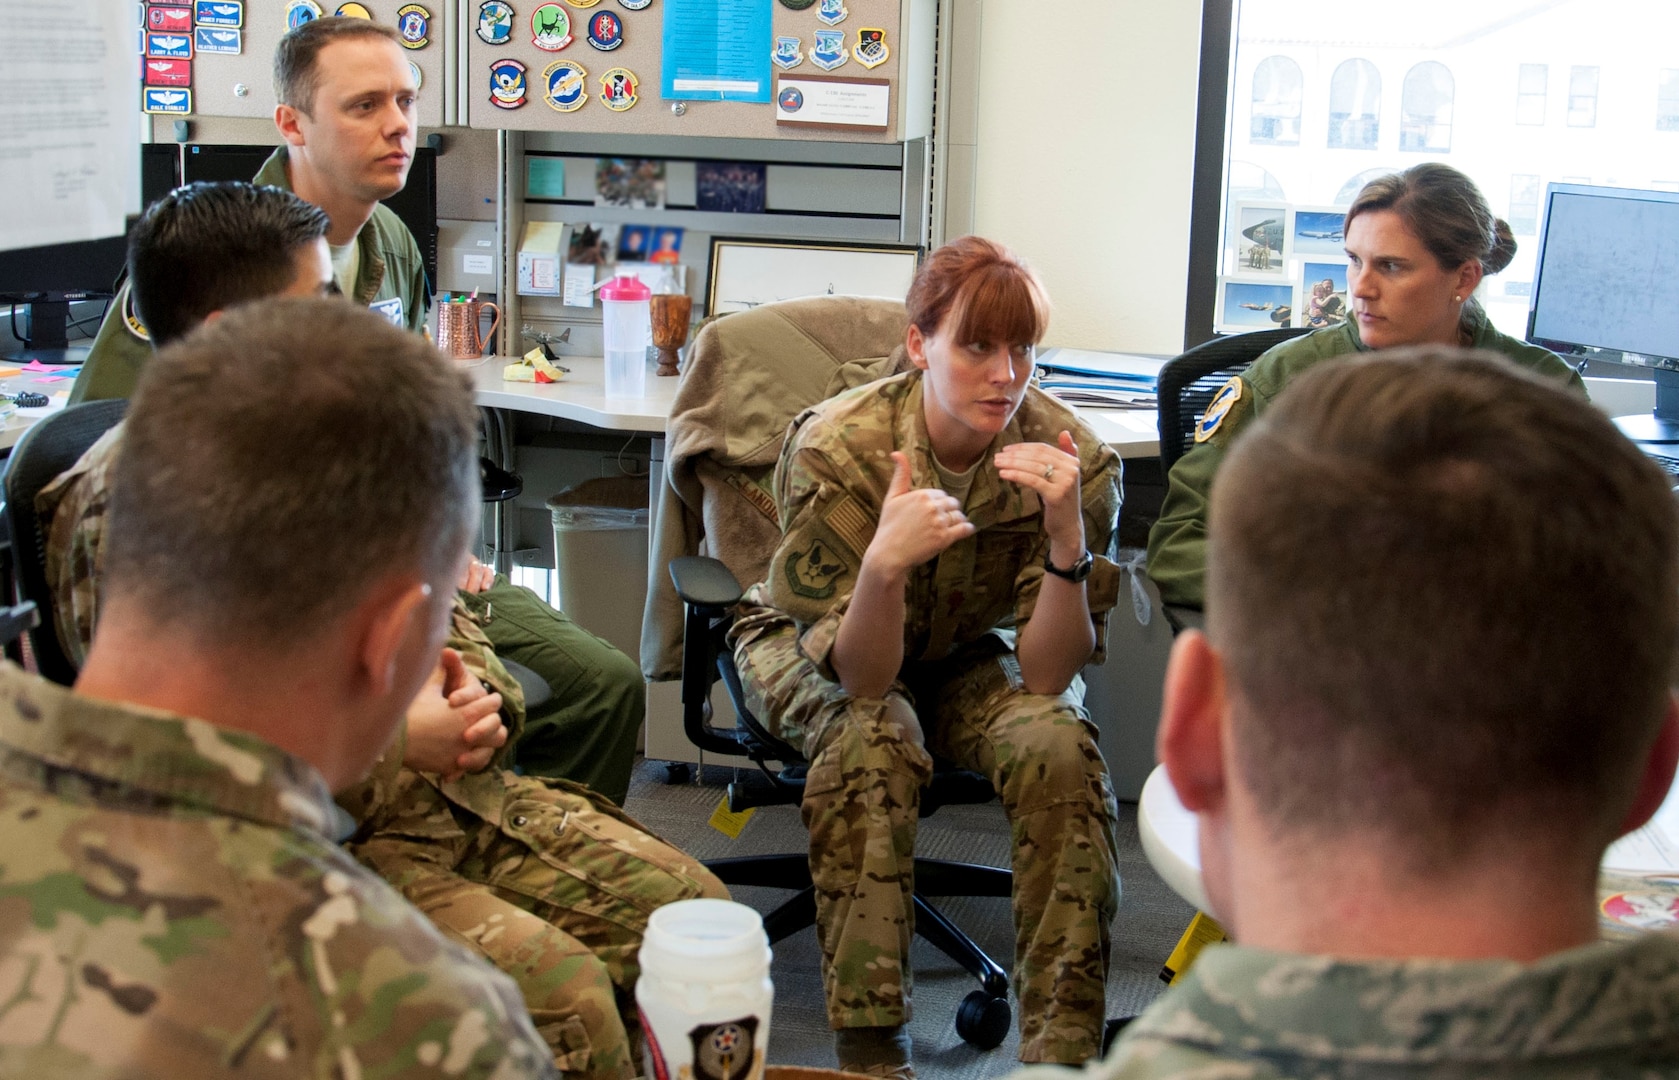 Squadron commanders from across the Air Force meet with assignment officers at Joint Base San Antonio-Randolph March 18. During the discussions they covered topics such as talent management policies and programs, and officer assignment processes, challenges and successes.